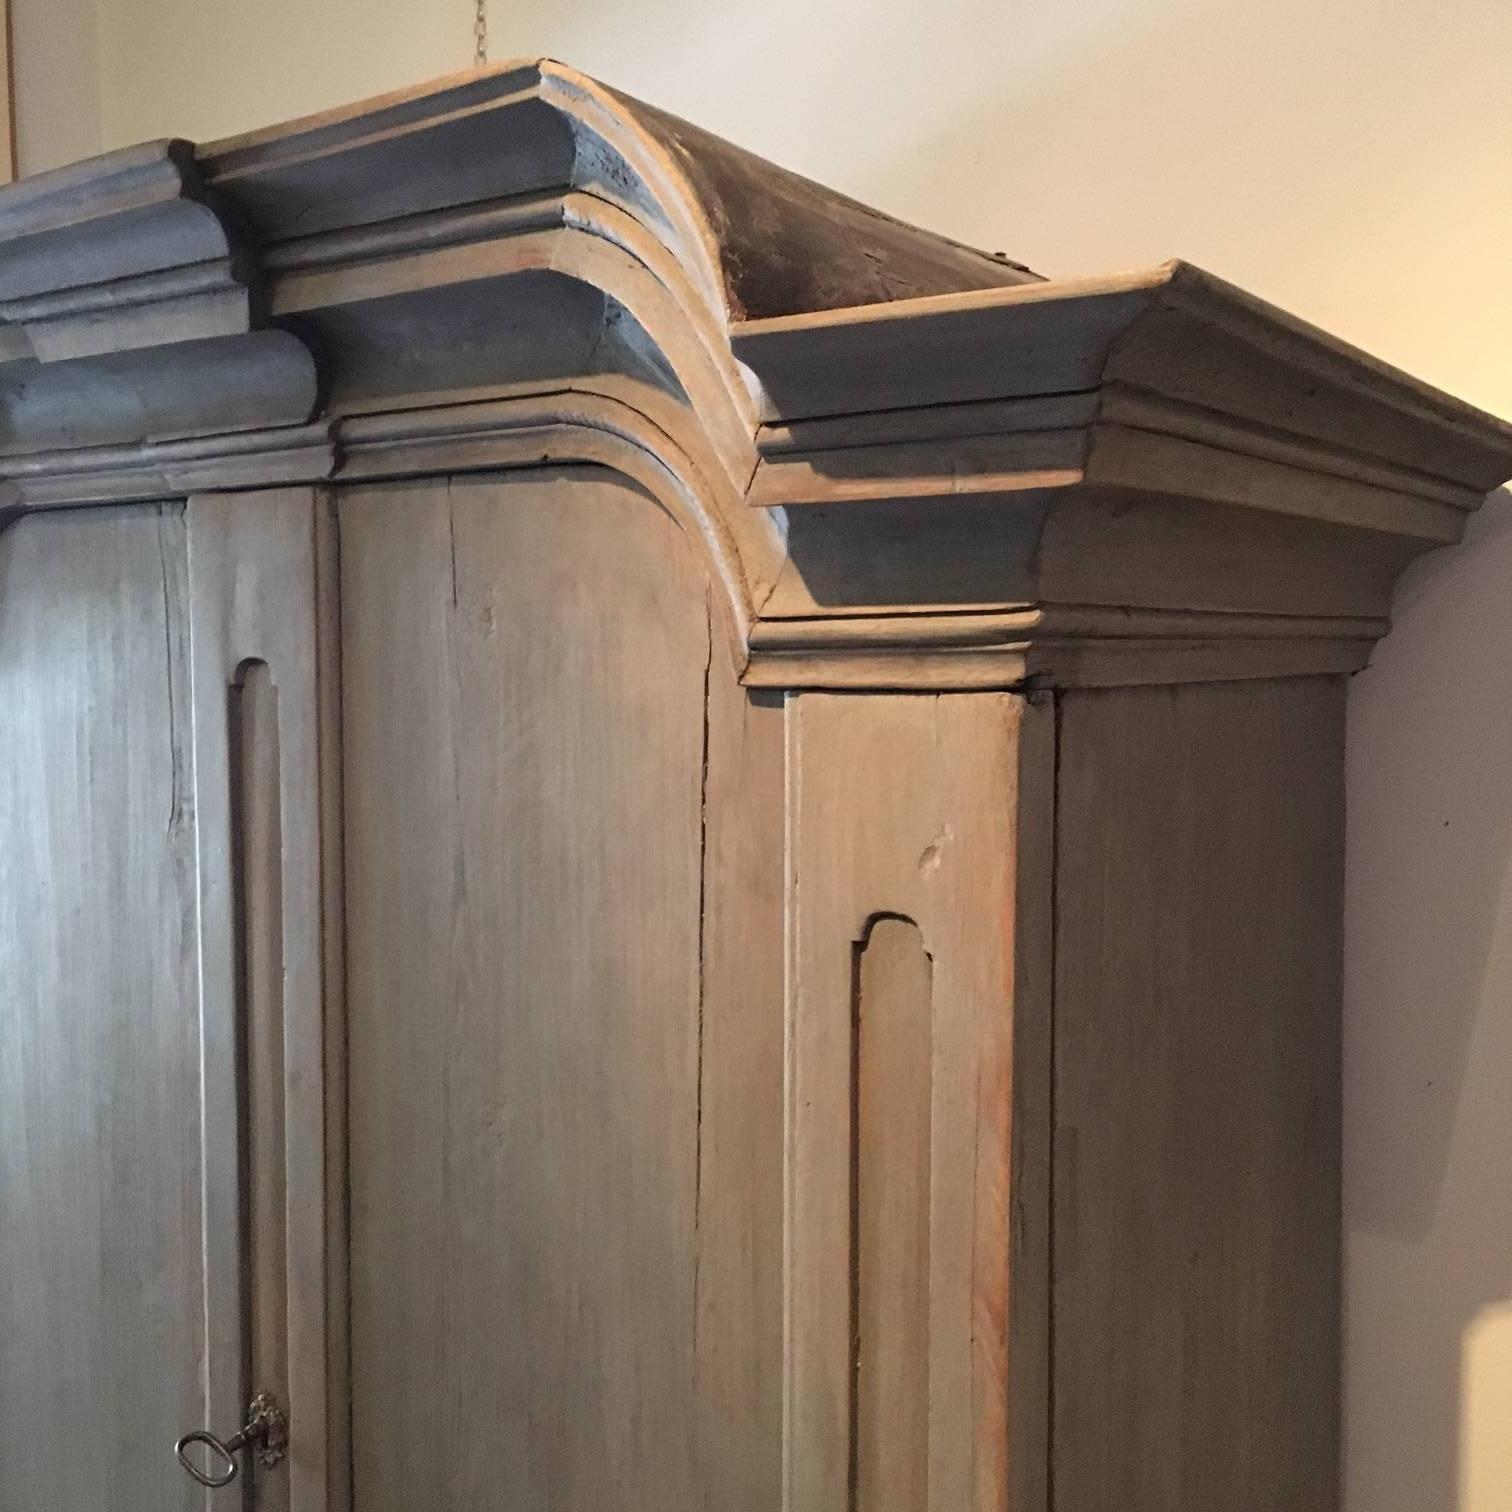 18th century Swedish Rococo cabinet. Blue or grey painting, typical Rococo top and legs. Shelfs and drawers behind doors.